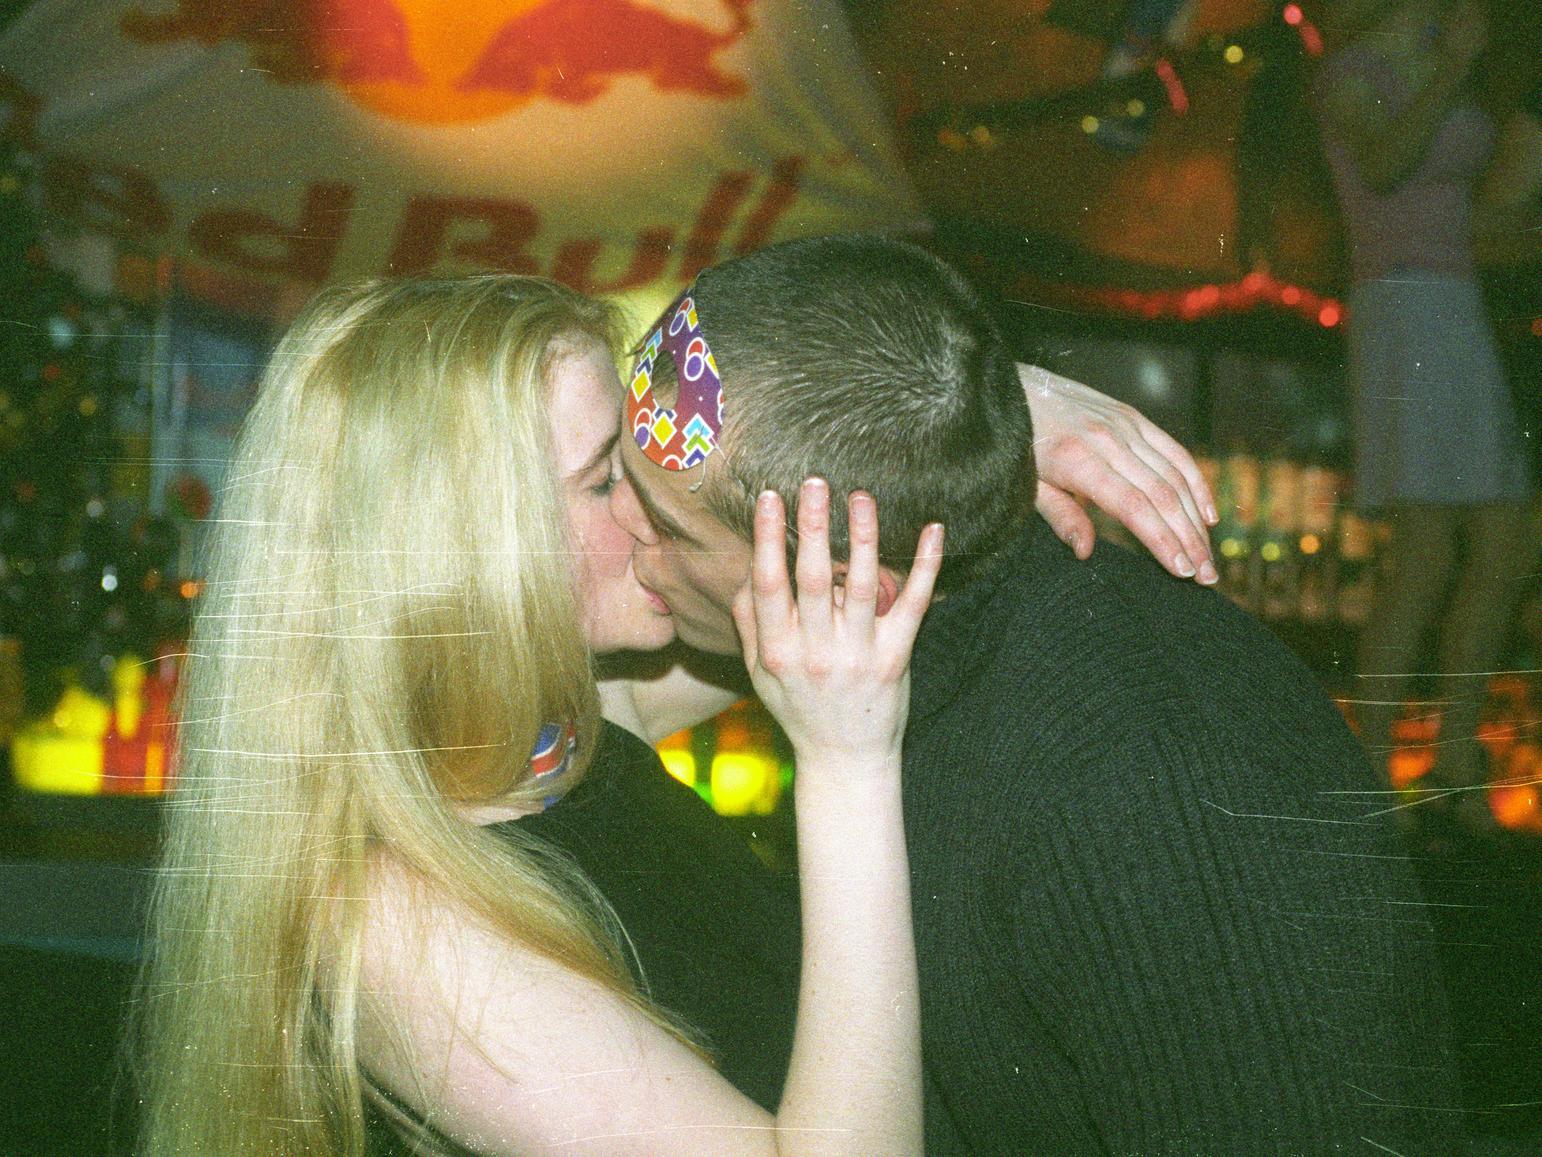 Another couple share a passionate kiss as the clock strikes midnight.